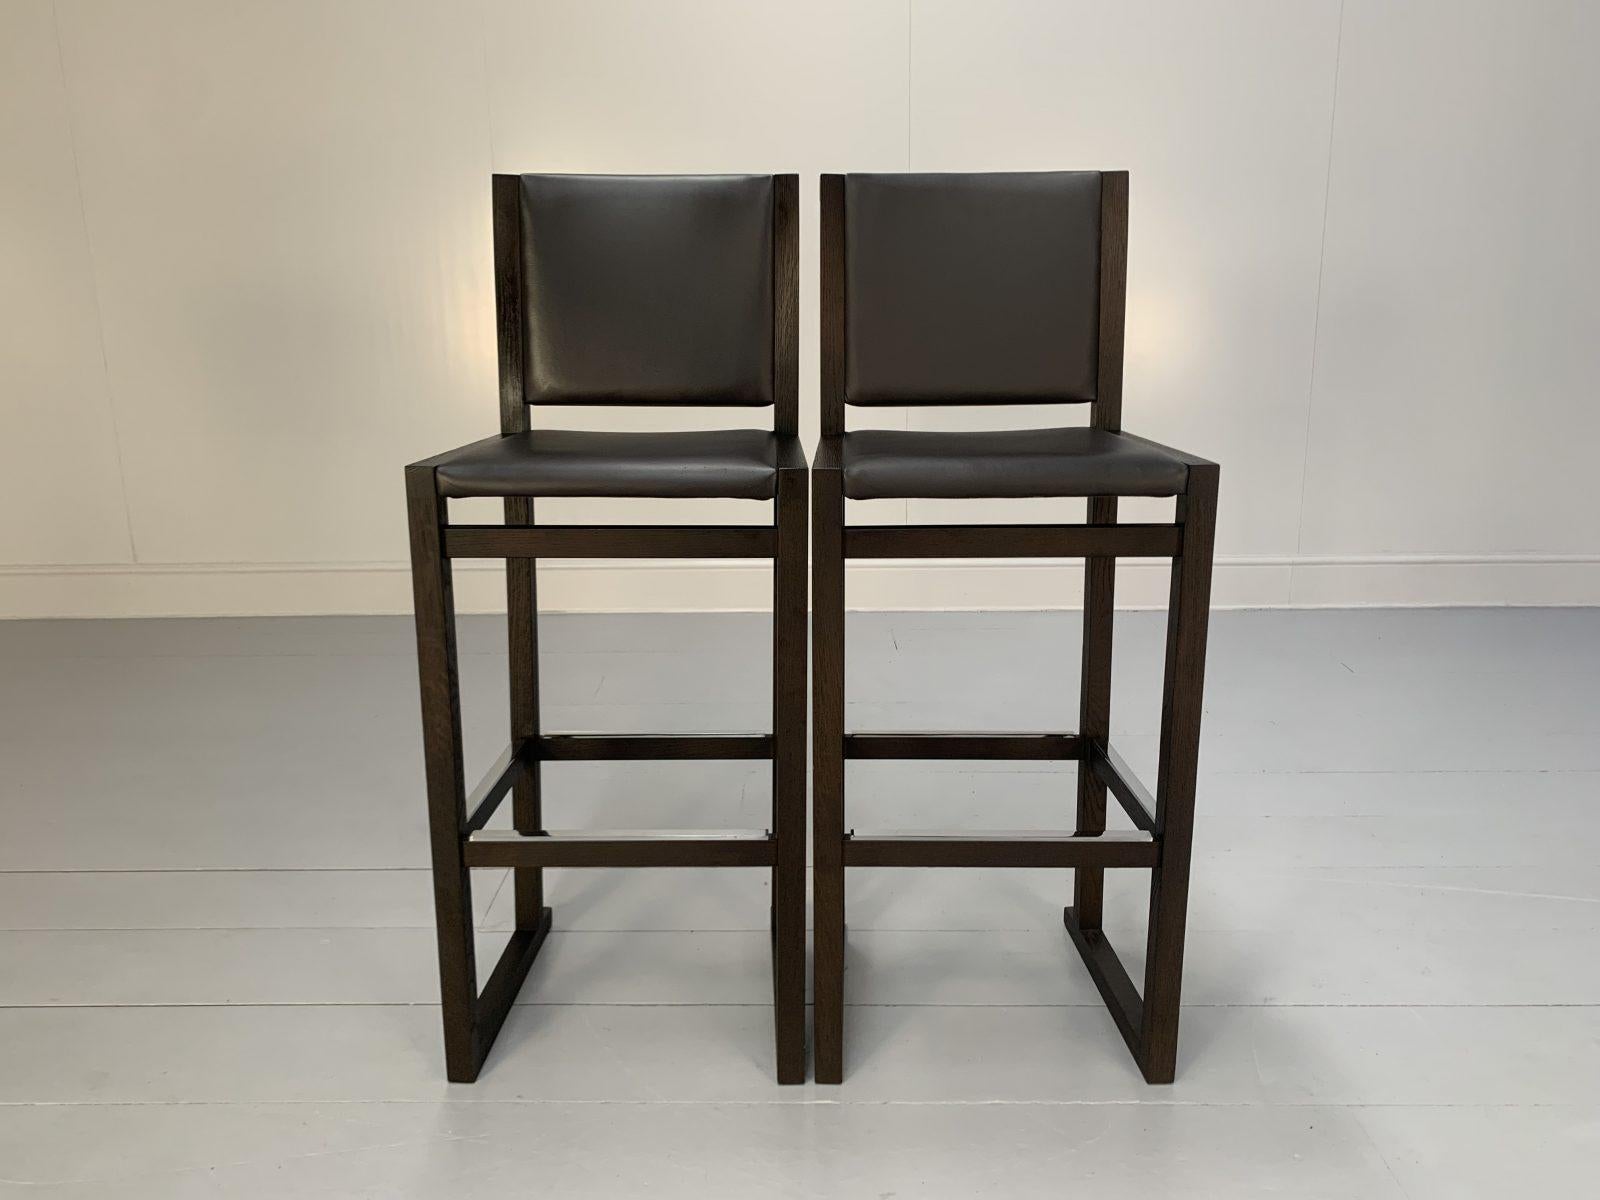 Hello Friends, and welcome to another unmissable offering from Lord Browns Furniture, the UK’s premier resource for fine Sofas and Chairs.

On offer on this occasion is one of the most handsome, refined suites of dining chairs you could hope to